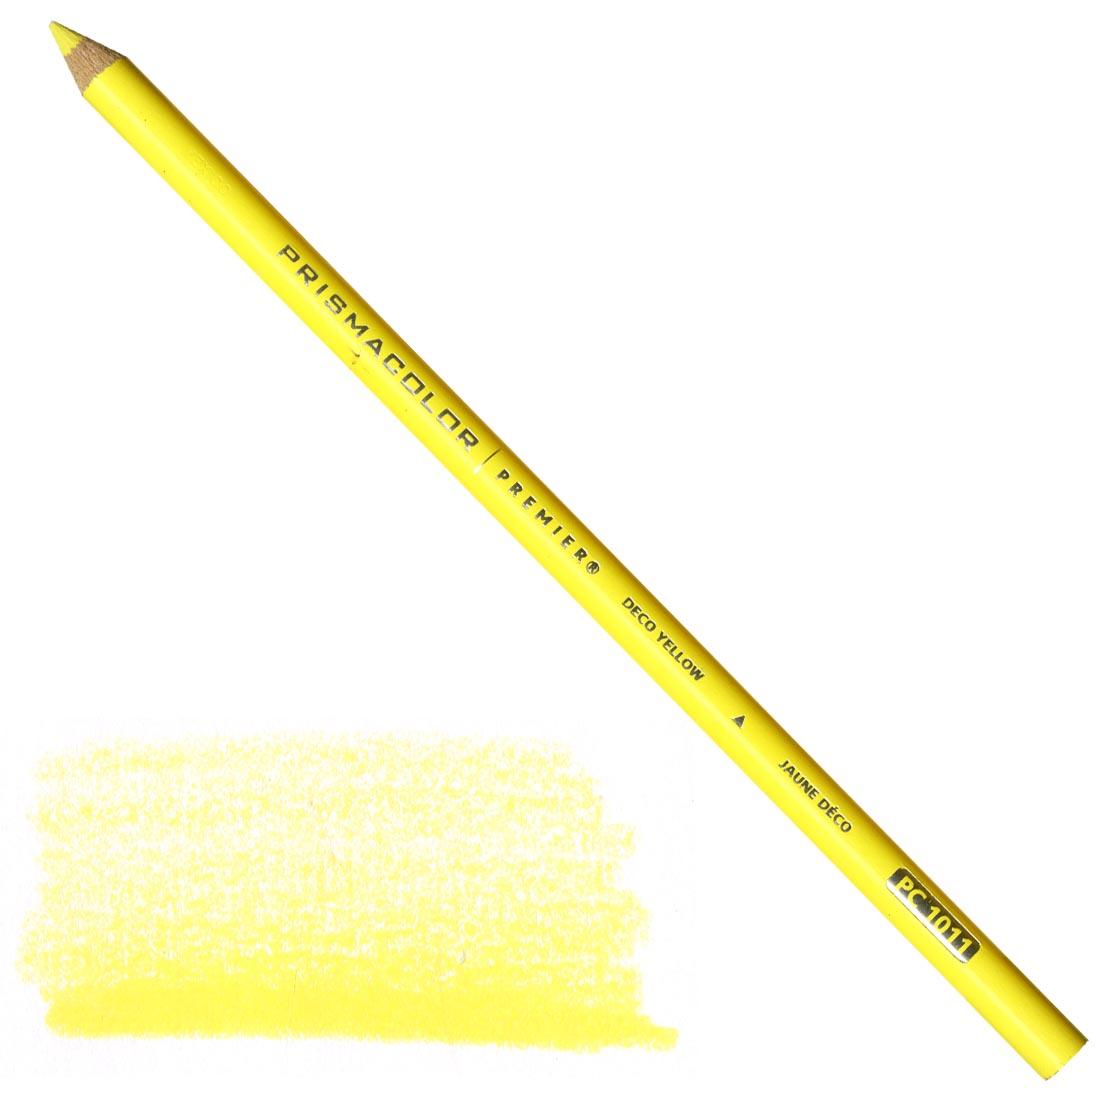 Deco Yellow Prismacolor Premier Colored Pencil with a sample colored swatch